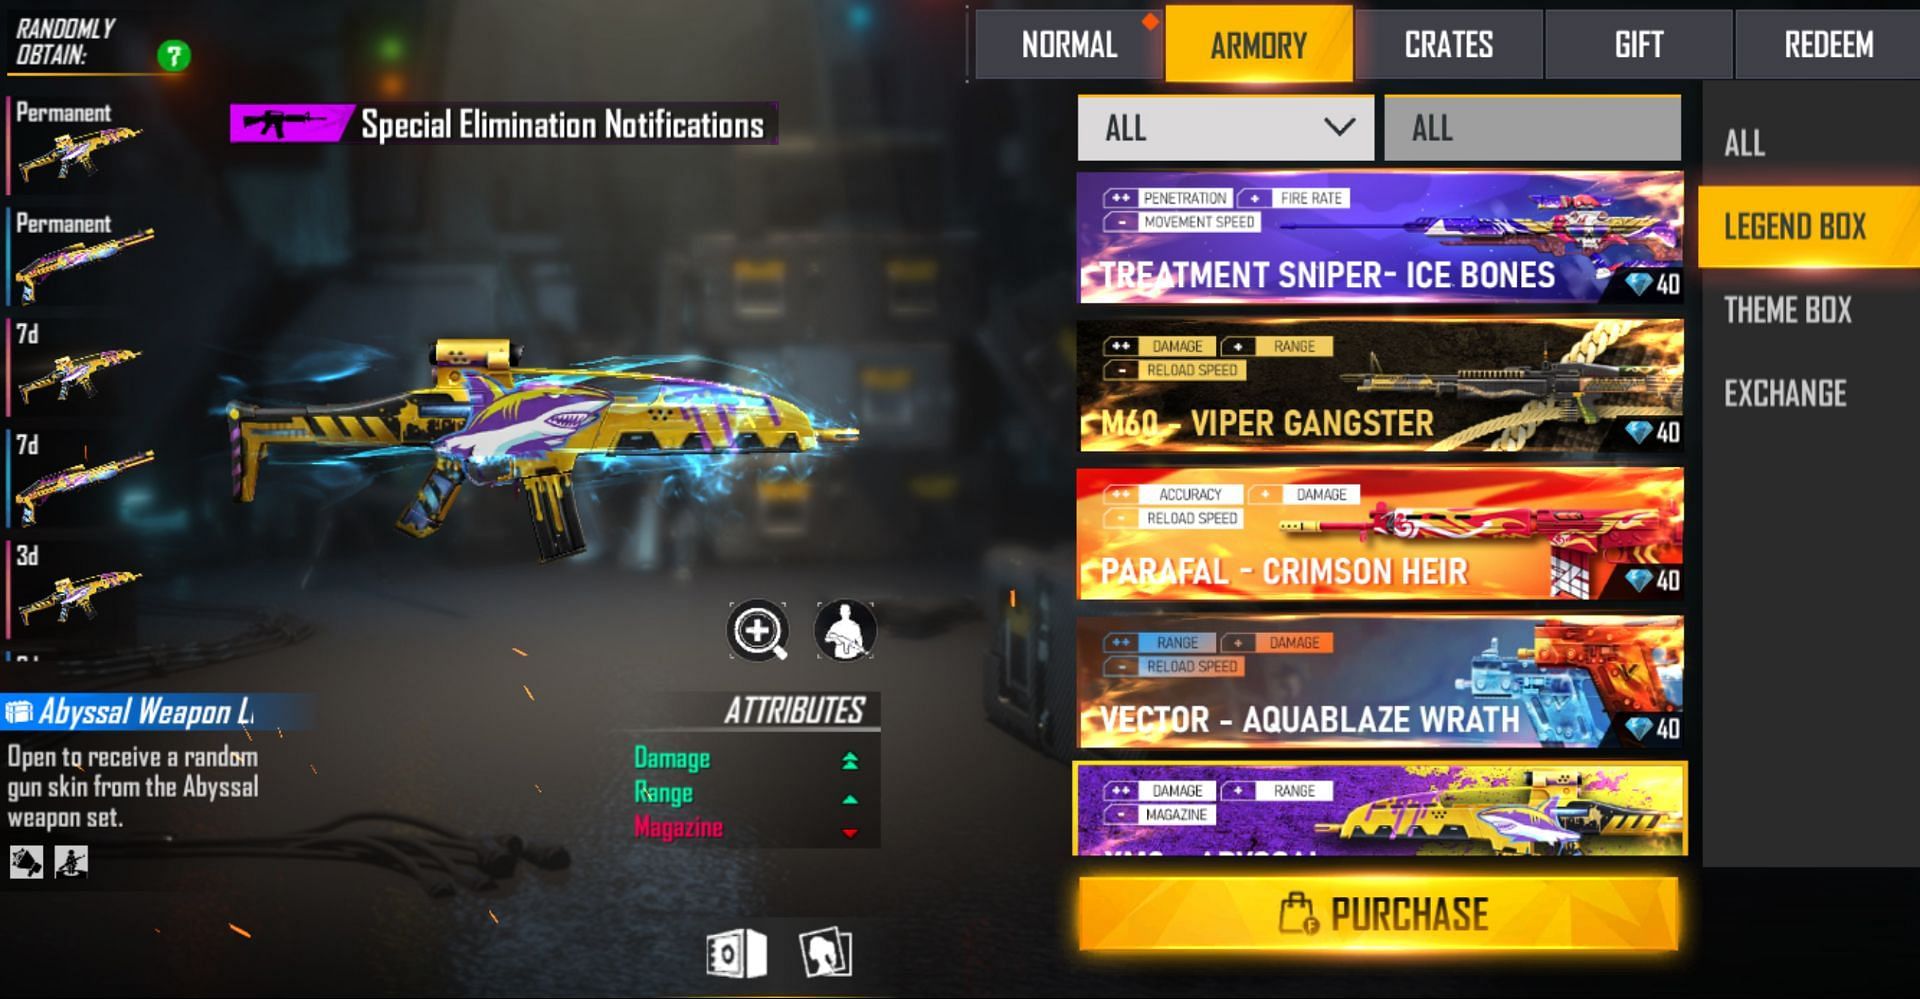 I Got So Many Permanent Gun Skins From Crates Opening  The Luckiest Player  Ever - Garena Free Fire 